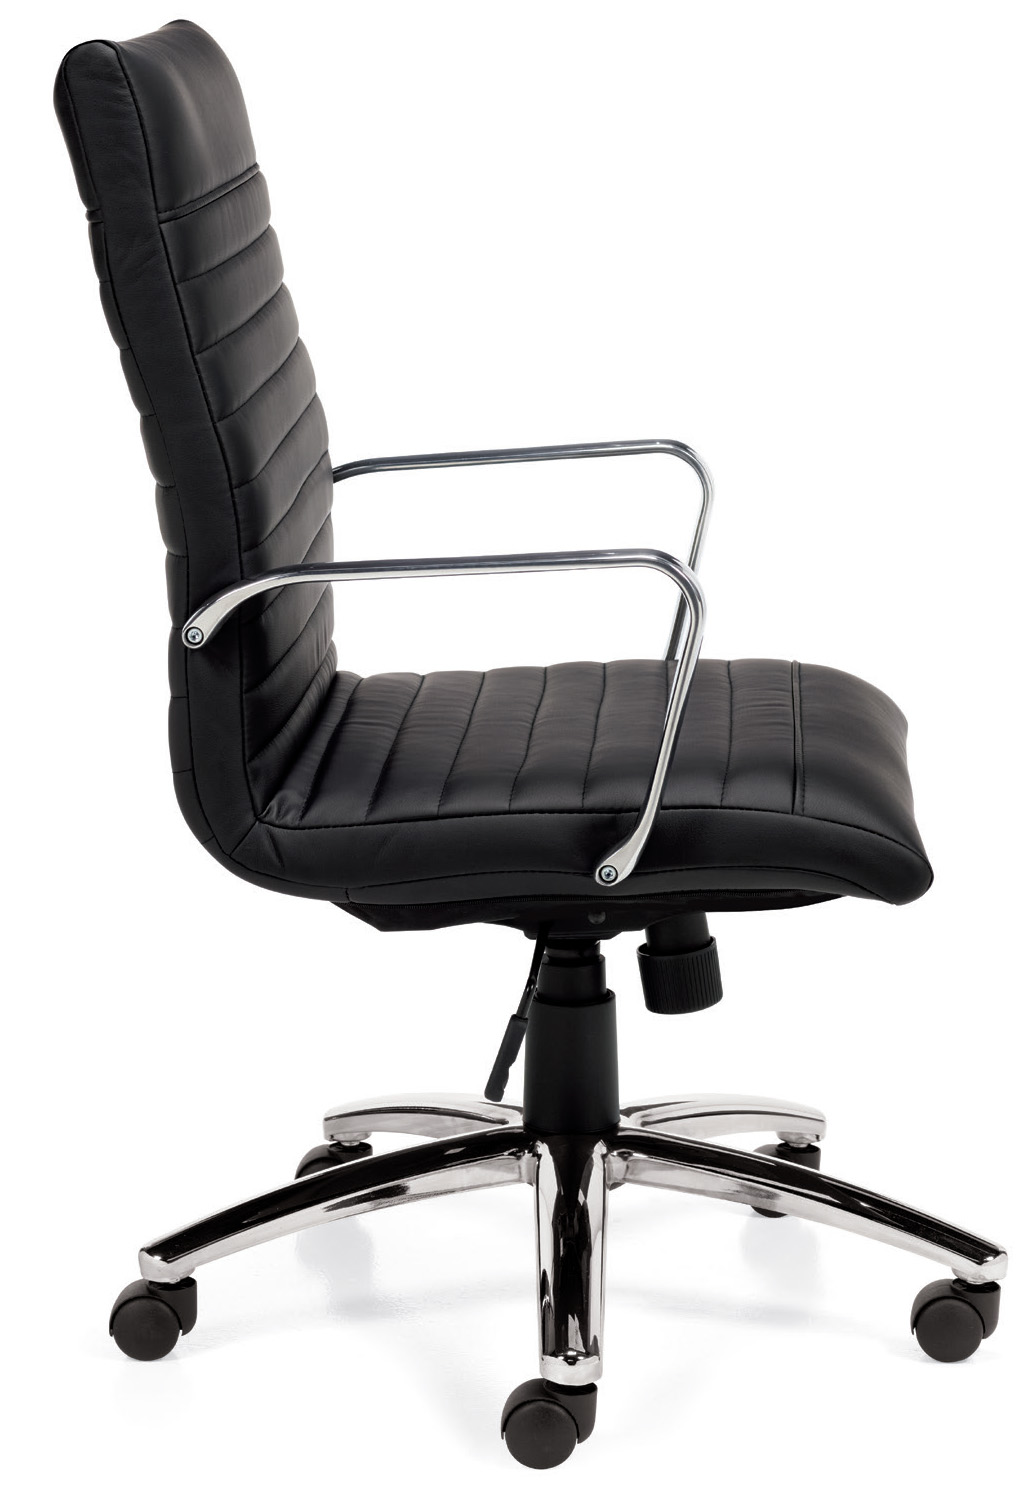 Offices To Go™ Luxhide Executive Chair with Chrome Arms, OTG11730B